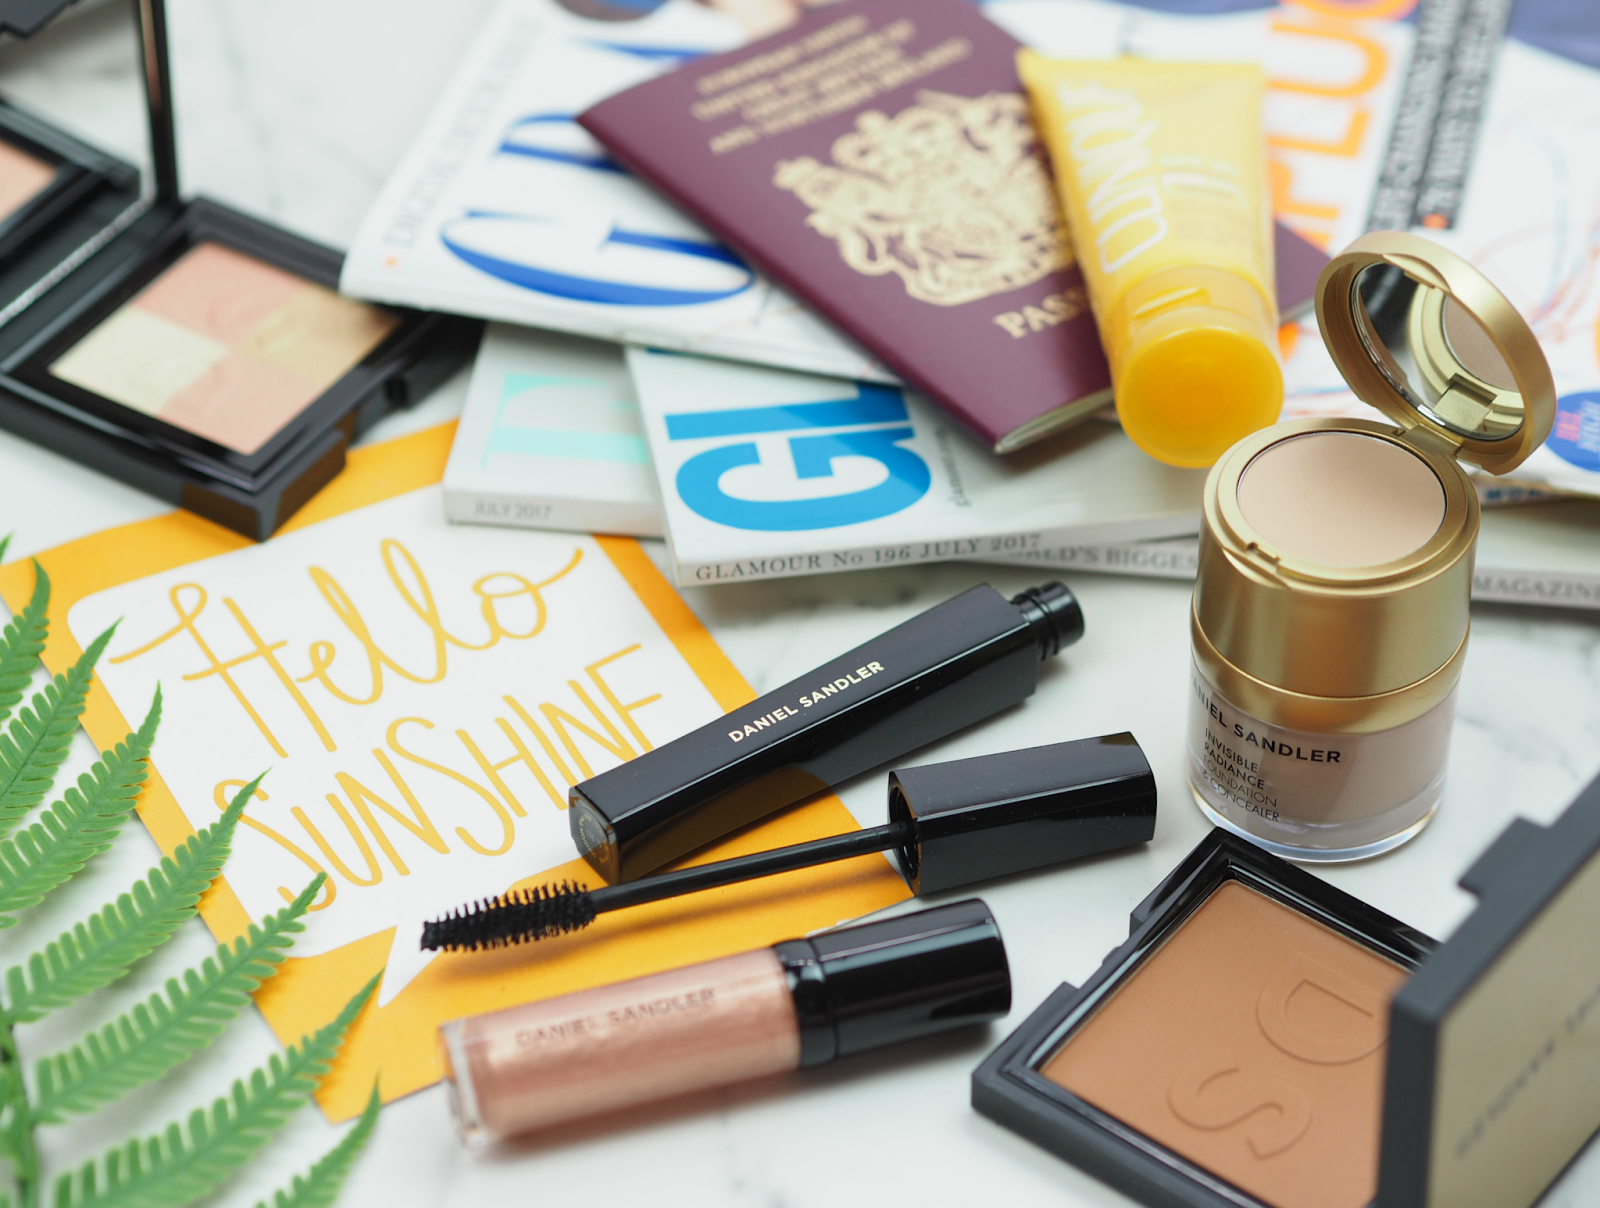 How To Get That Holiday Glow In Five Easy Steps (Without Having To Step Foot On A Plane!)